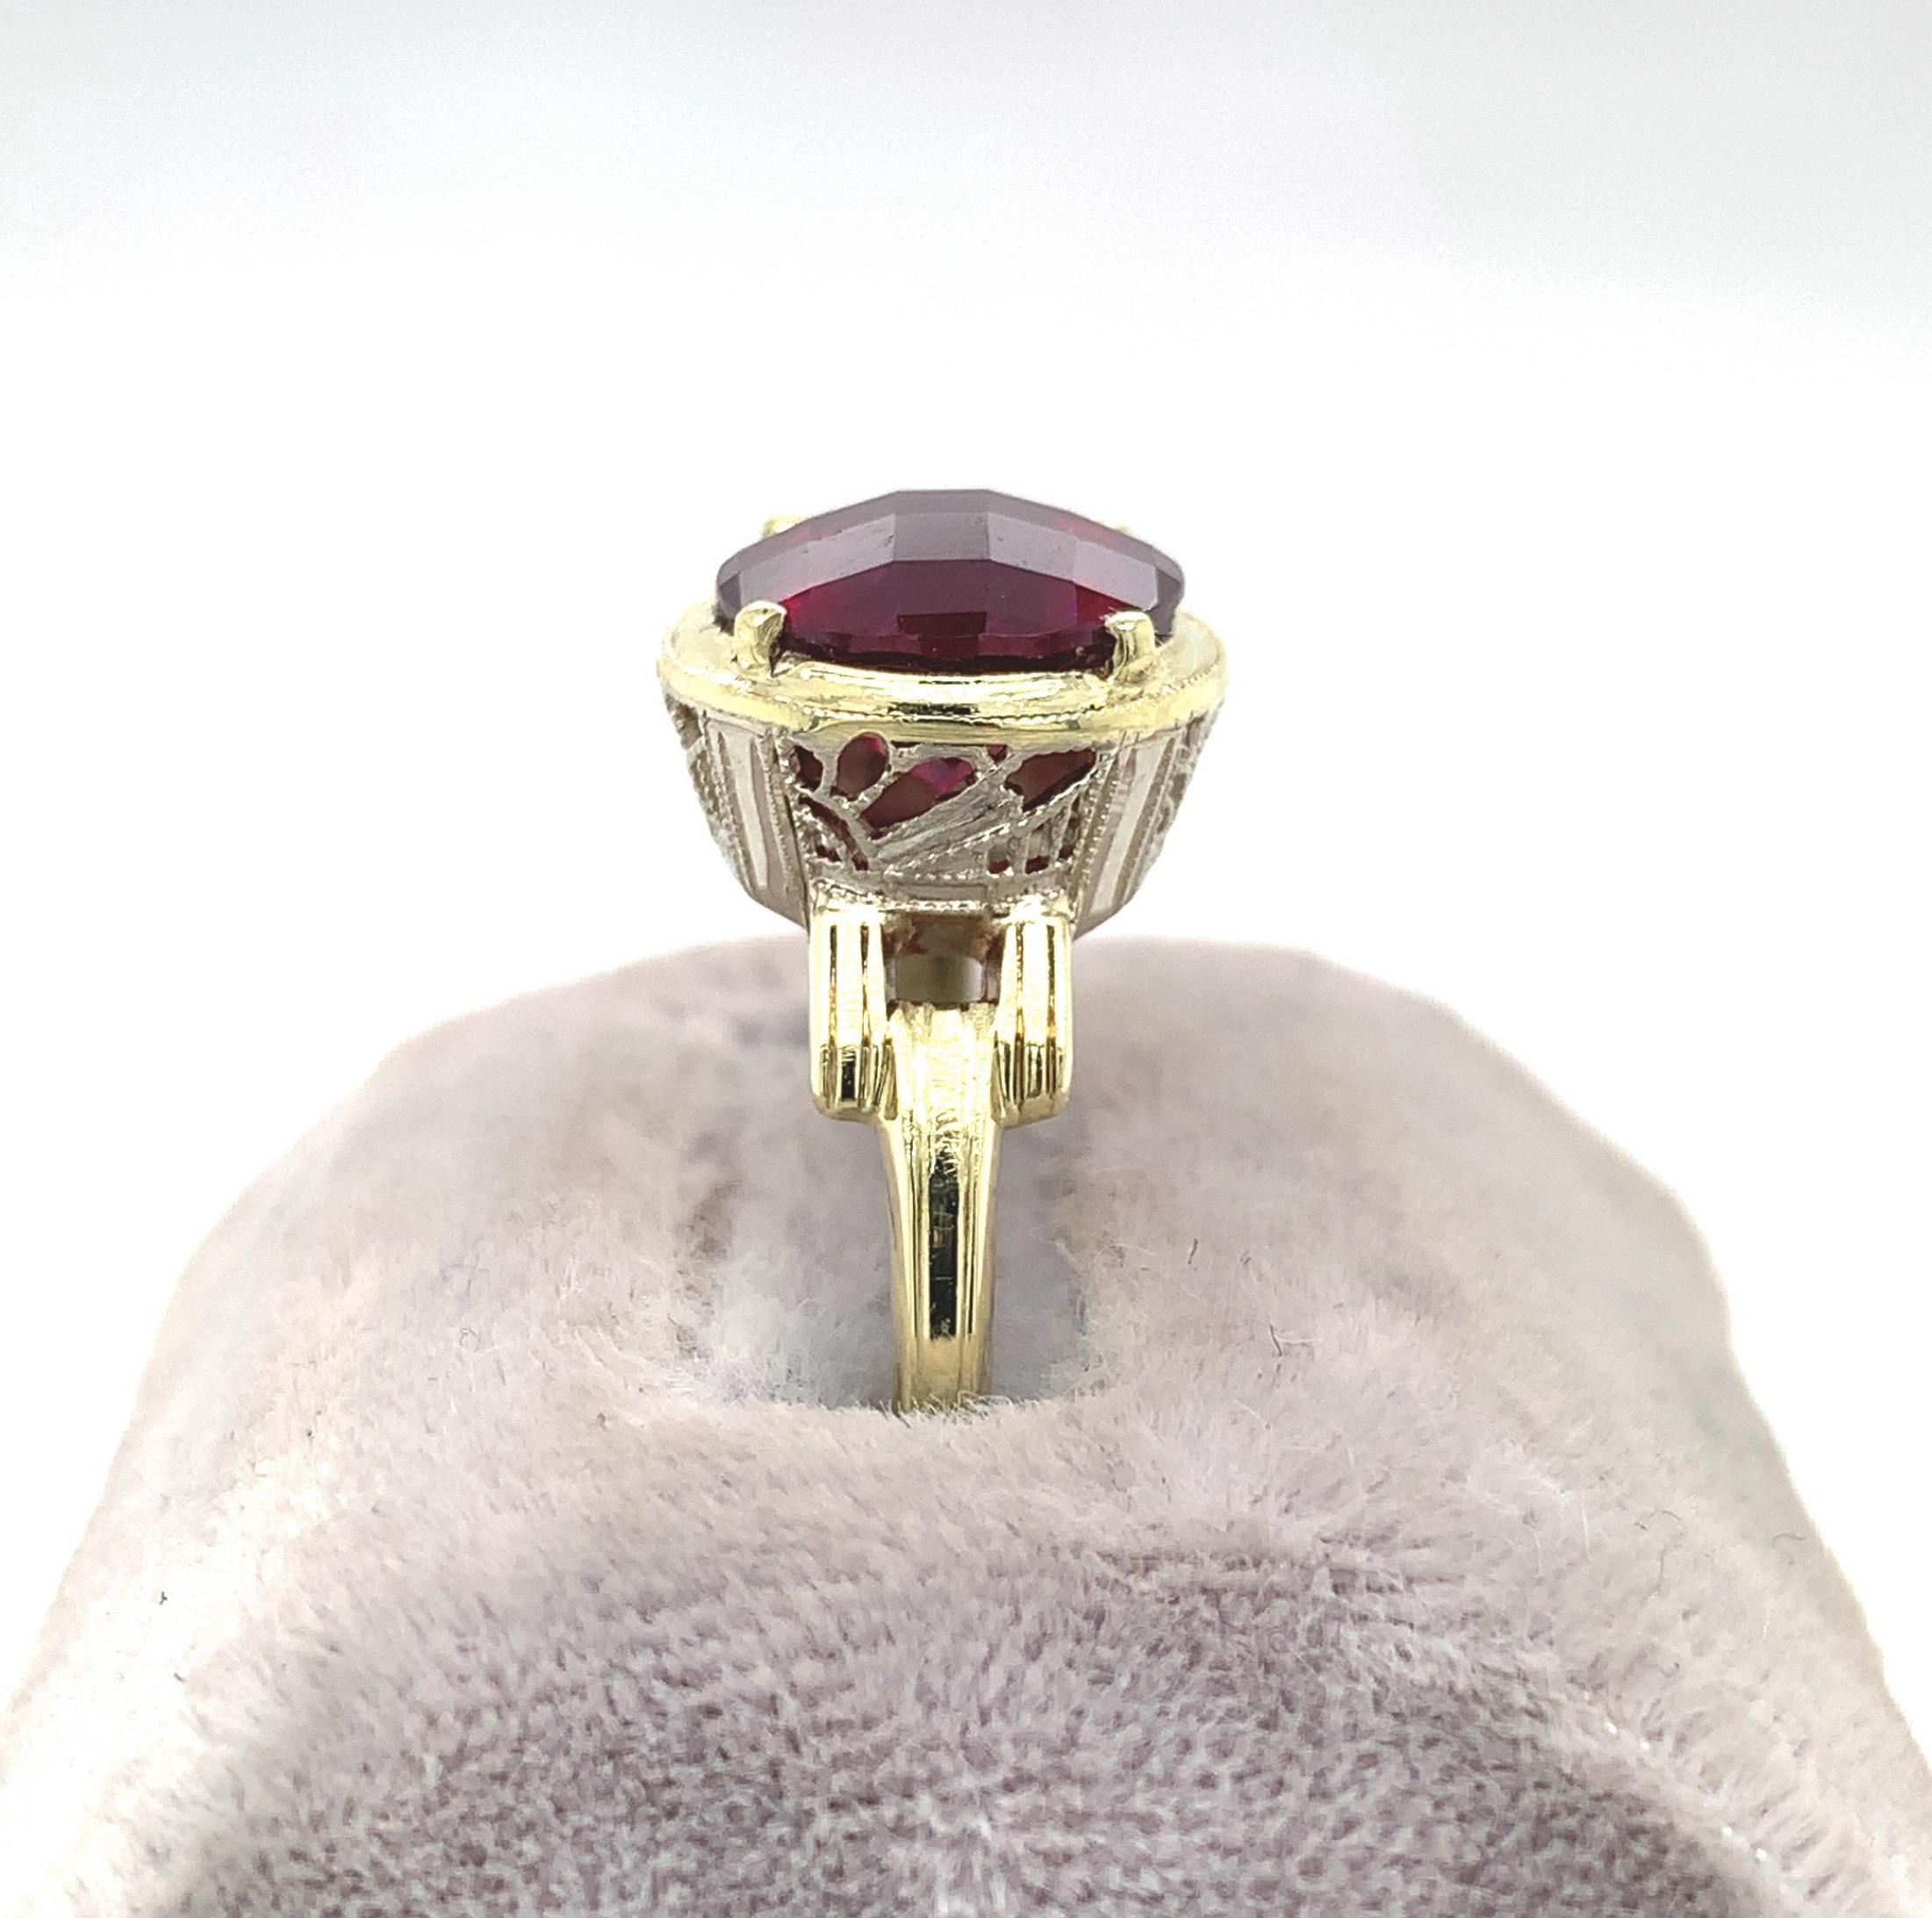 14K yellow gold ring with white gold filigree set with a large round rhodolite garnet. The garnet weighs 4 1/2 carats and measures about 10mm. The garnet has raspberry darker pink color with a specialty checkerboard top. The ring fits a size 8.5